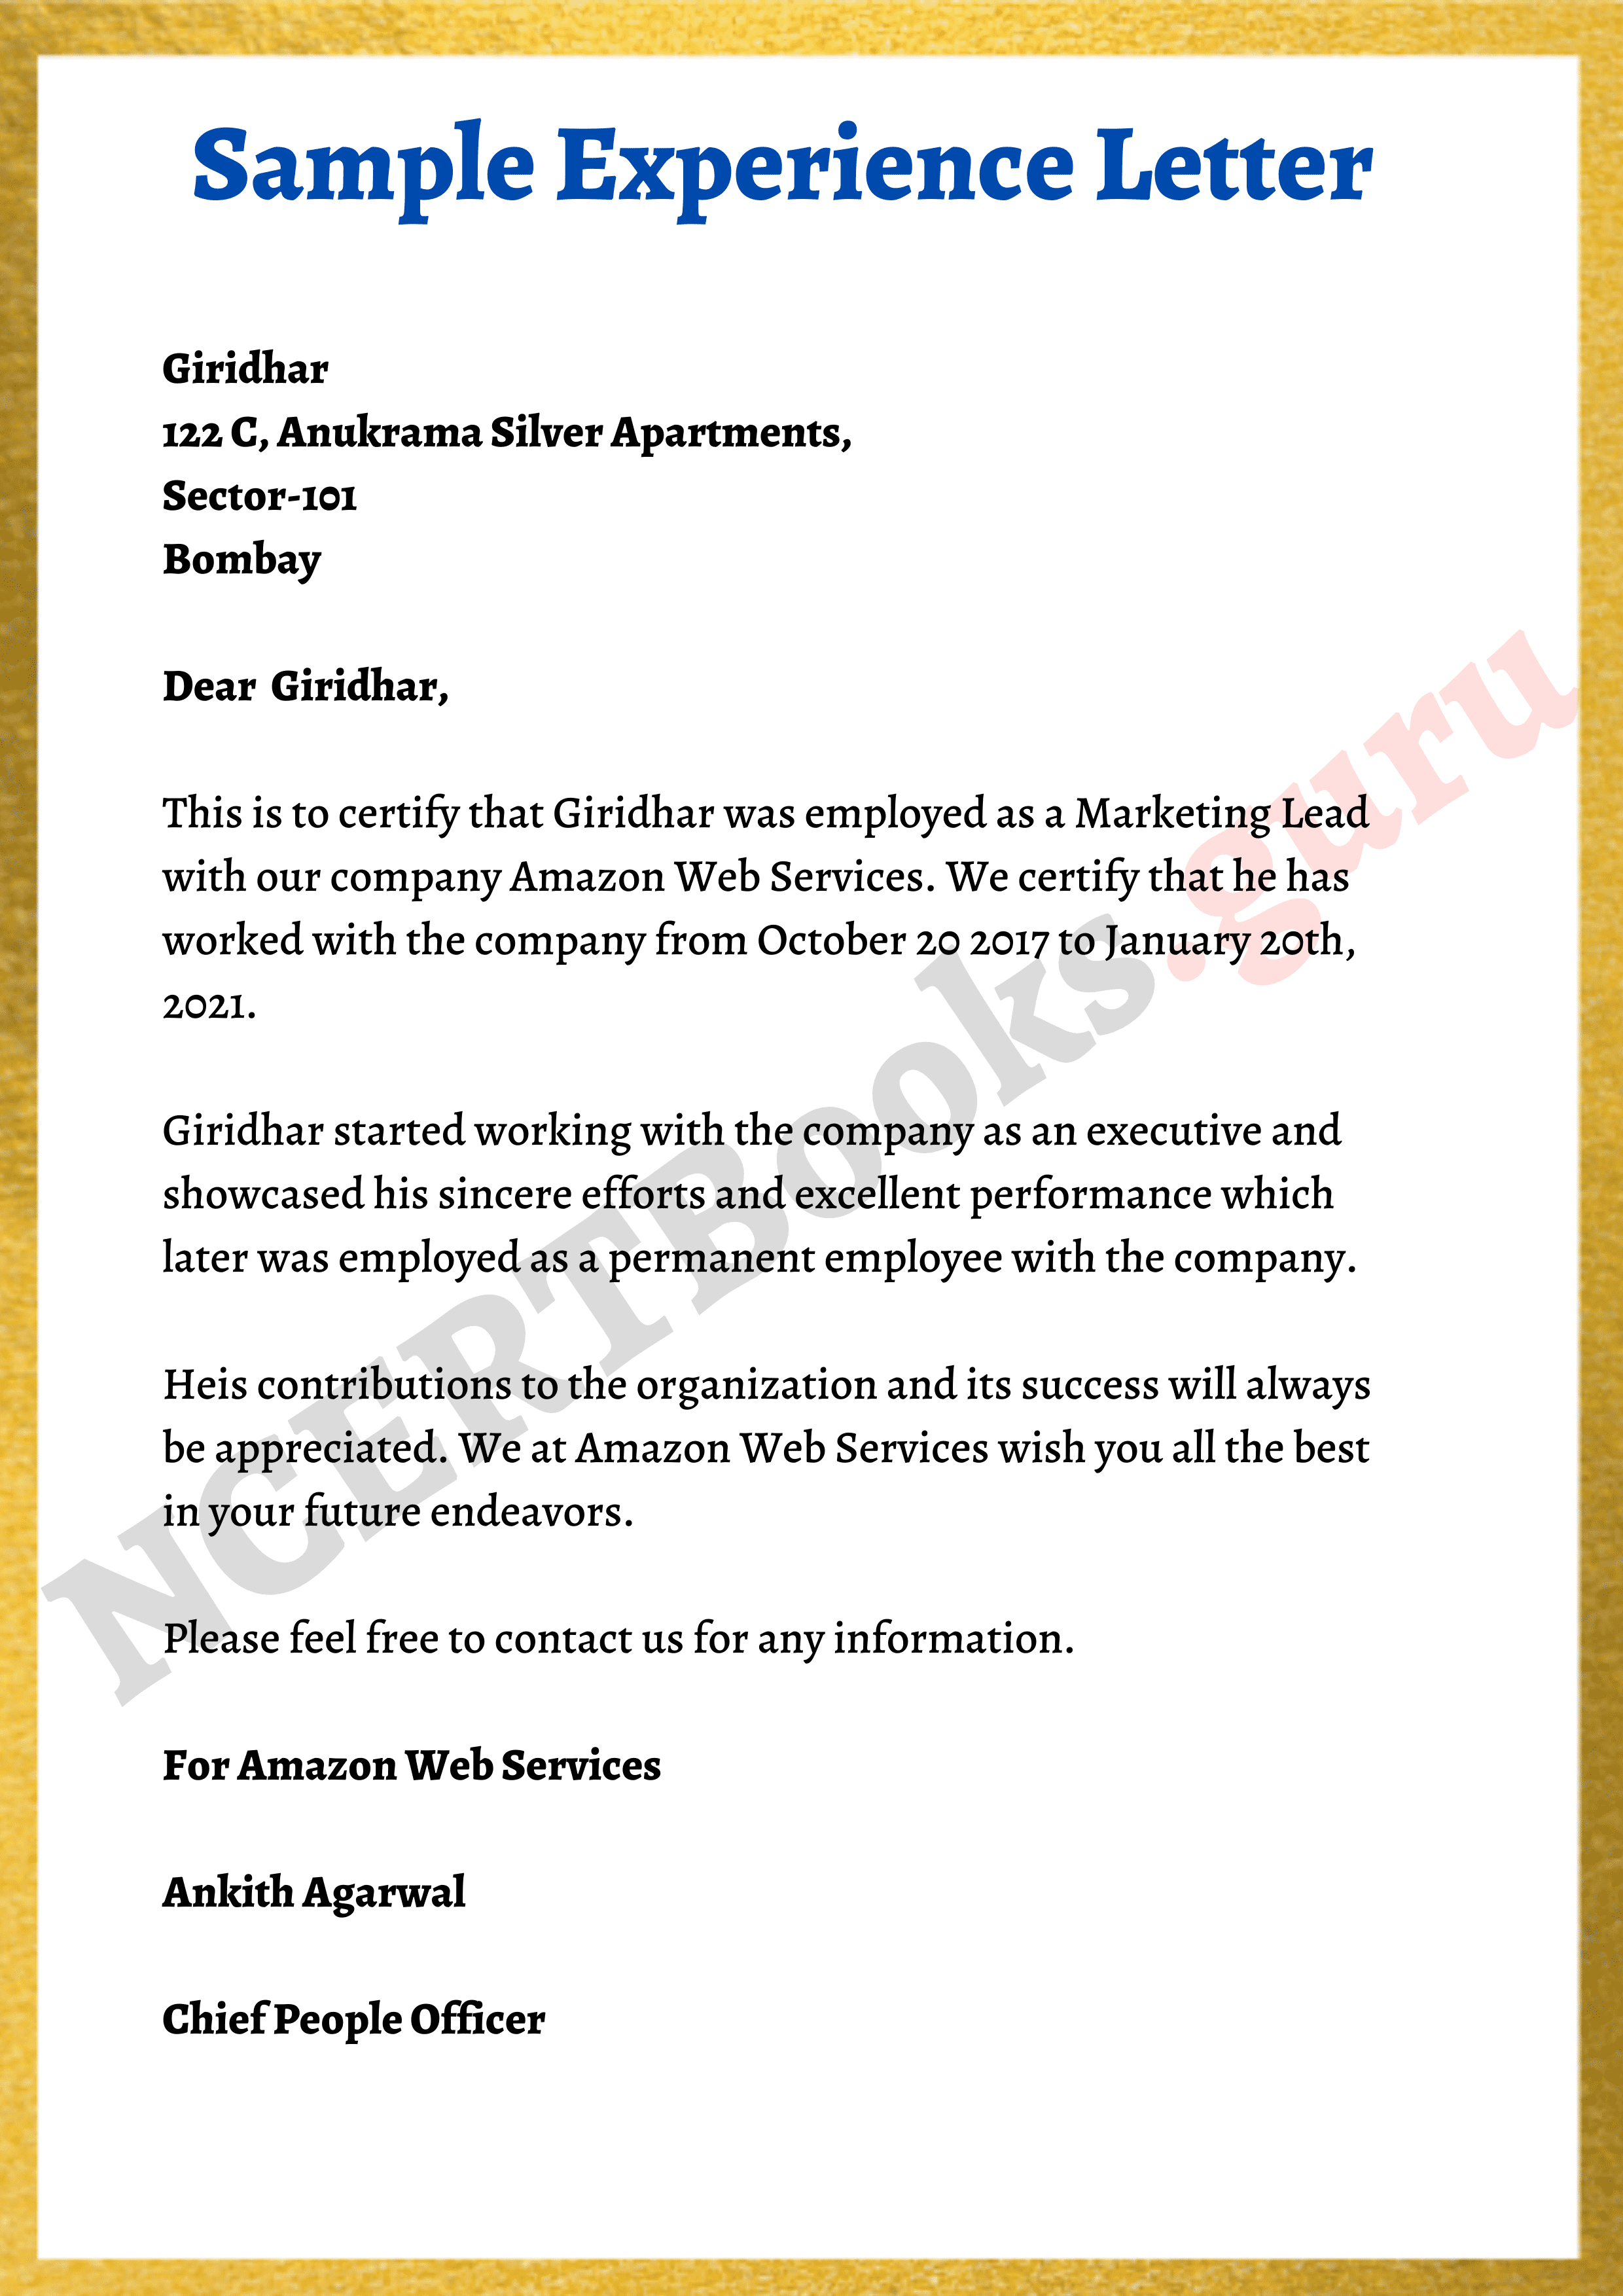 Sample Experience Letter